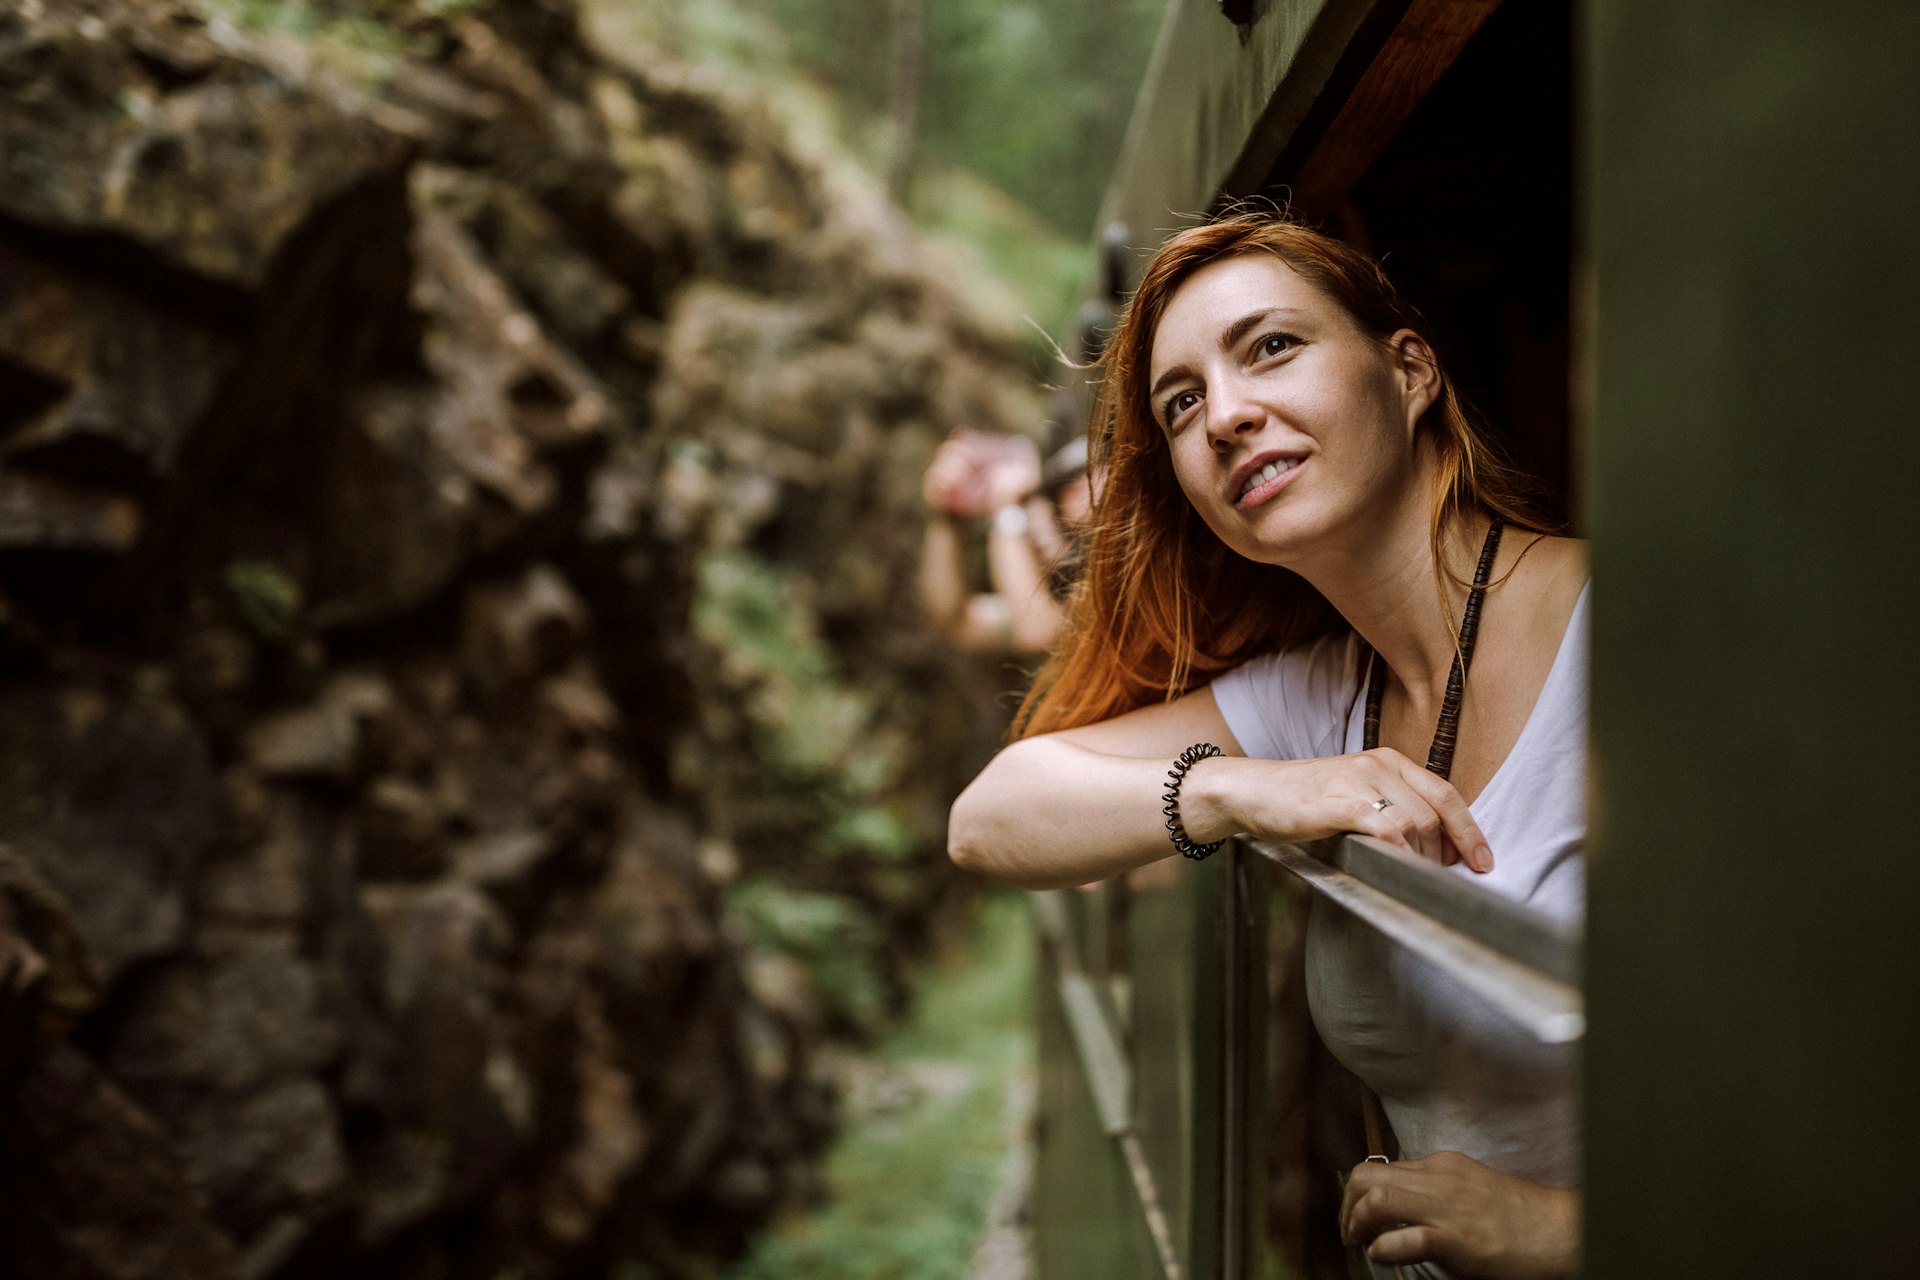 A woman is traveling on a train, leaning out of a window and looking out at the scenery